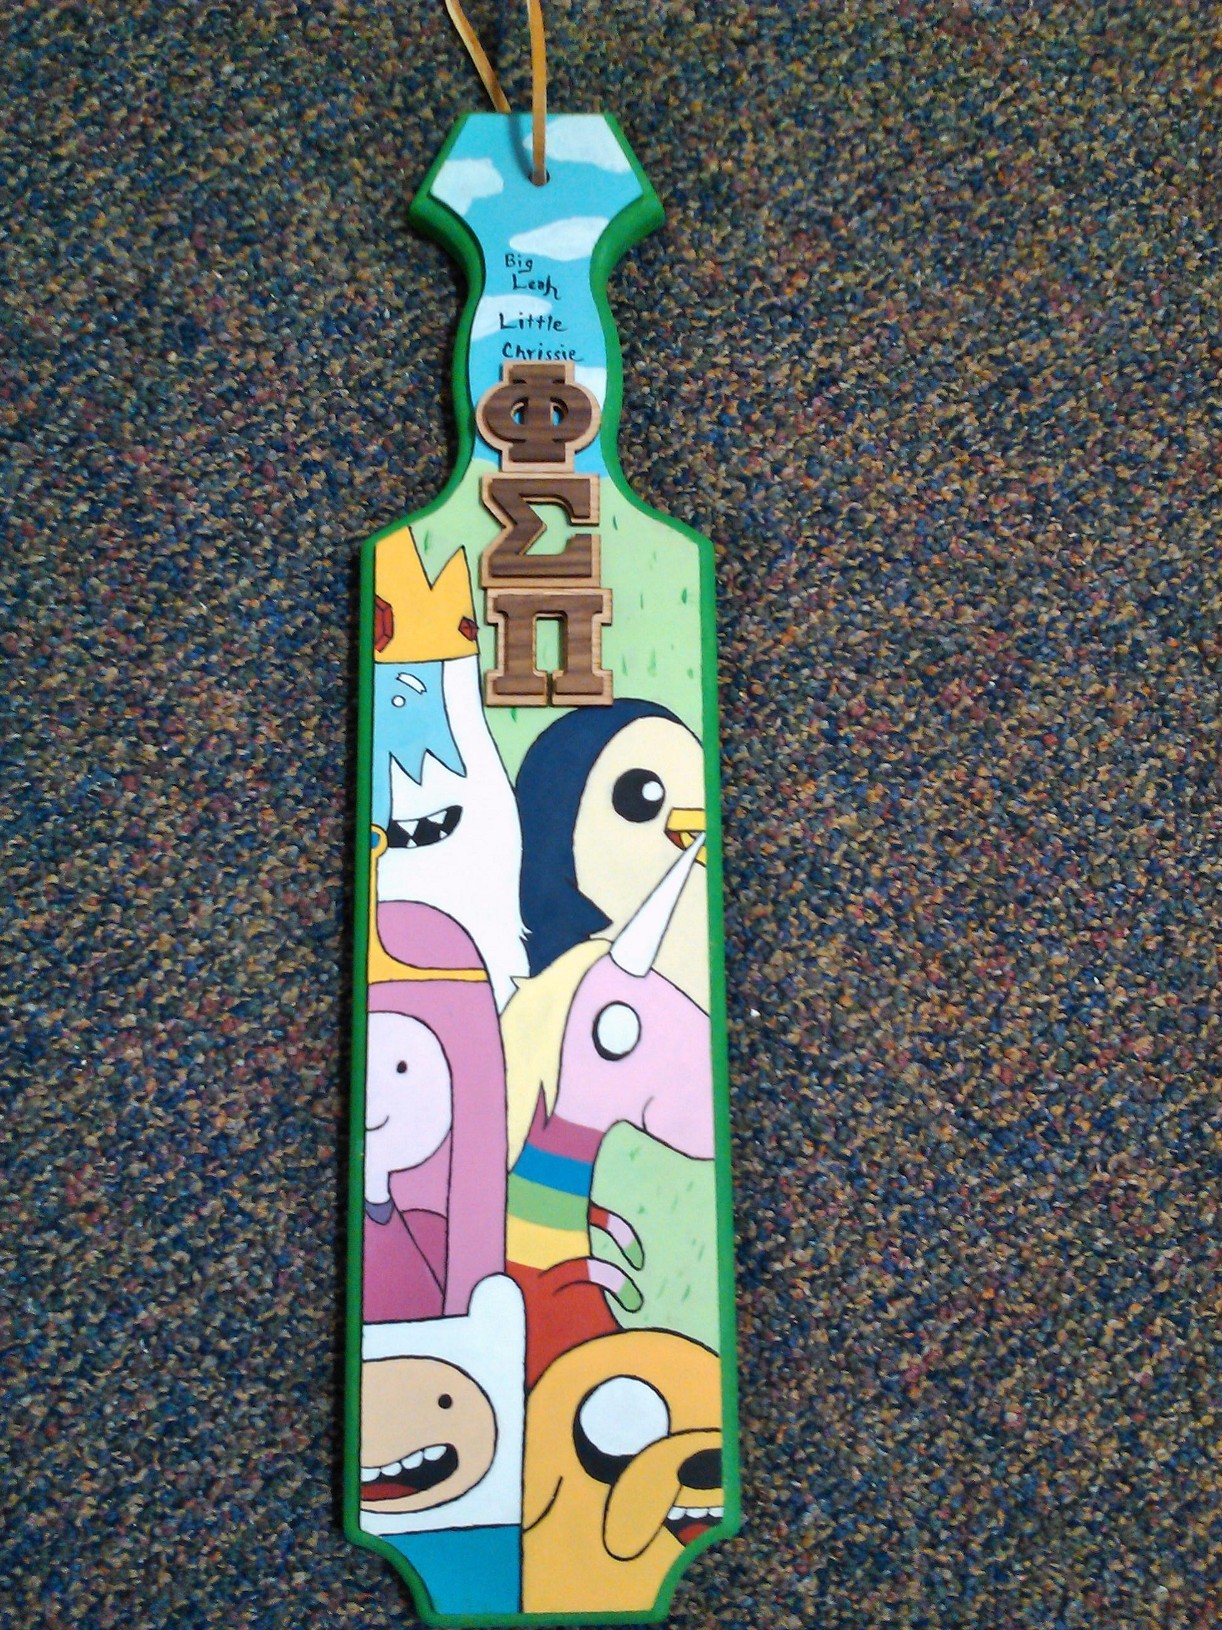 adventuretime:
“Thank you, sir, may we have another…
… smack in the buns with this sweet, sweet, Adventure Time paddle (though if you drilled some holes in it, you’d cut down wind resistance, just a suggestion).
adventuretimefan:
“ ‘Adventure Time...